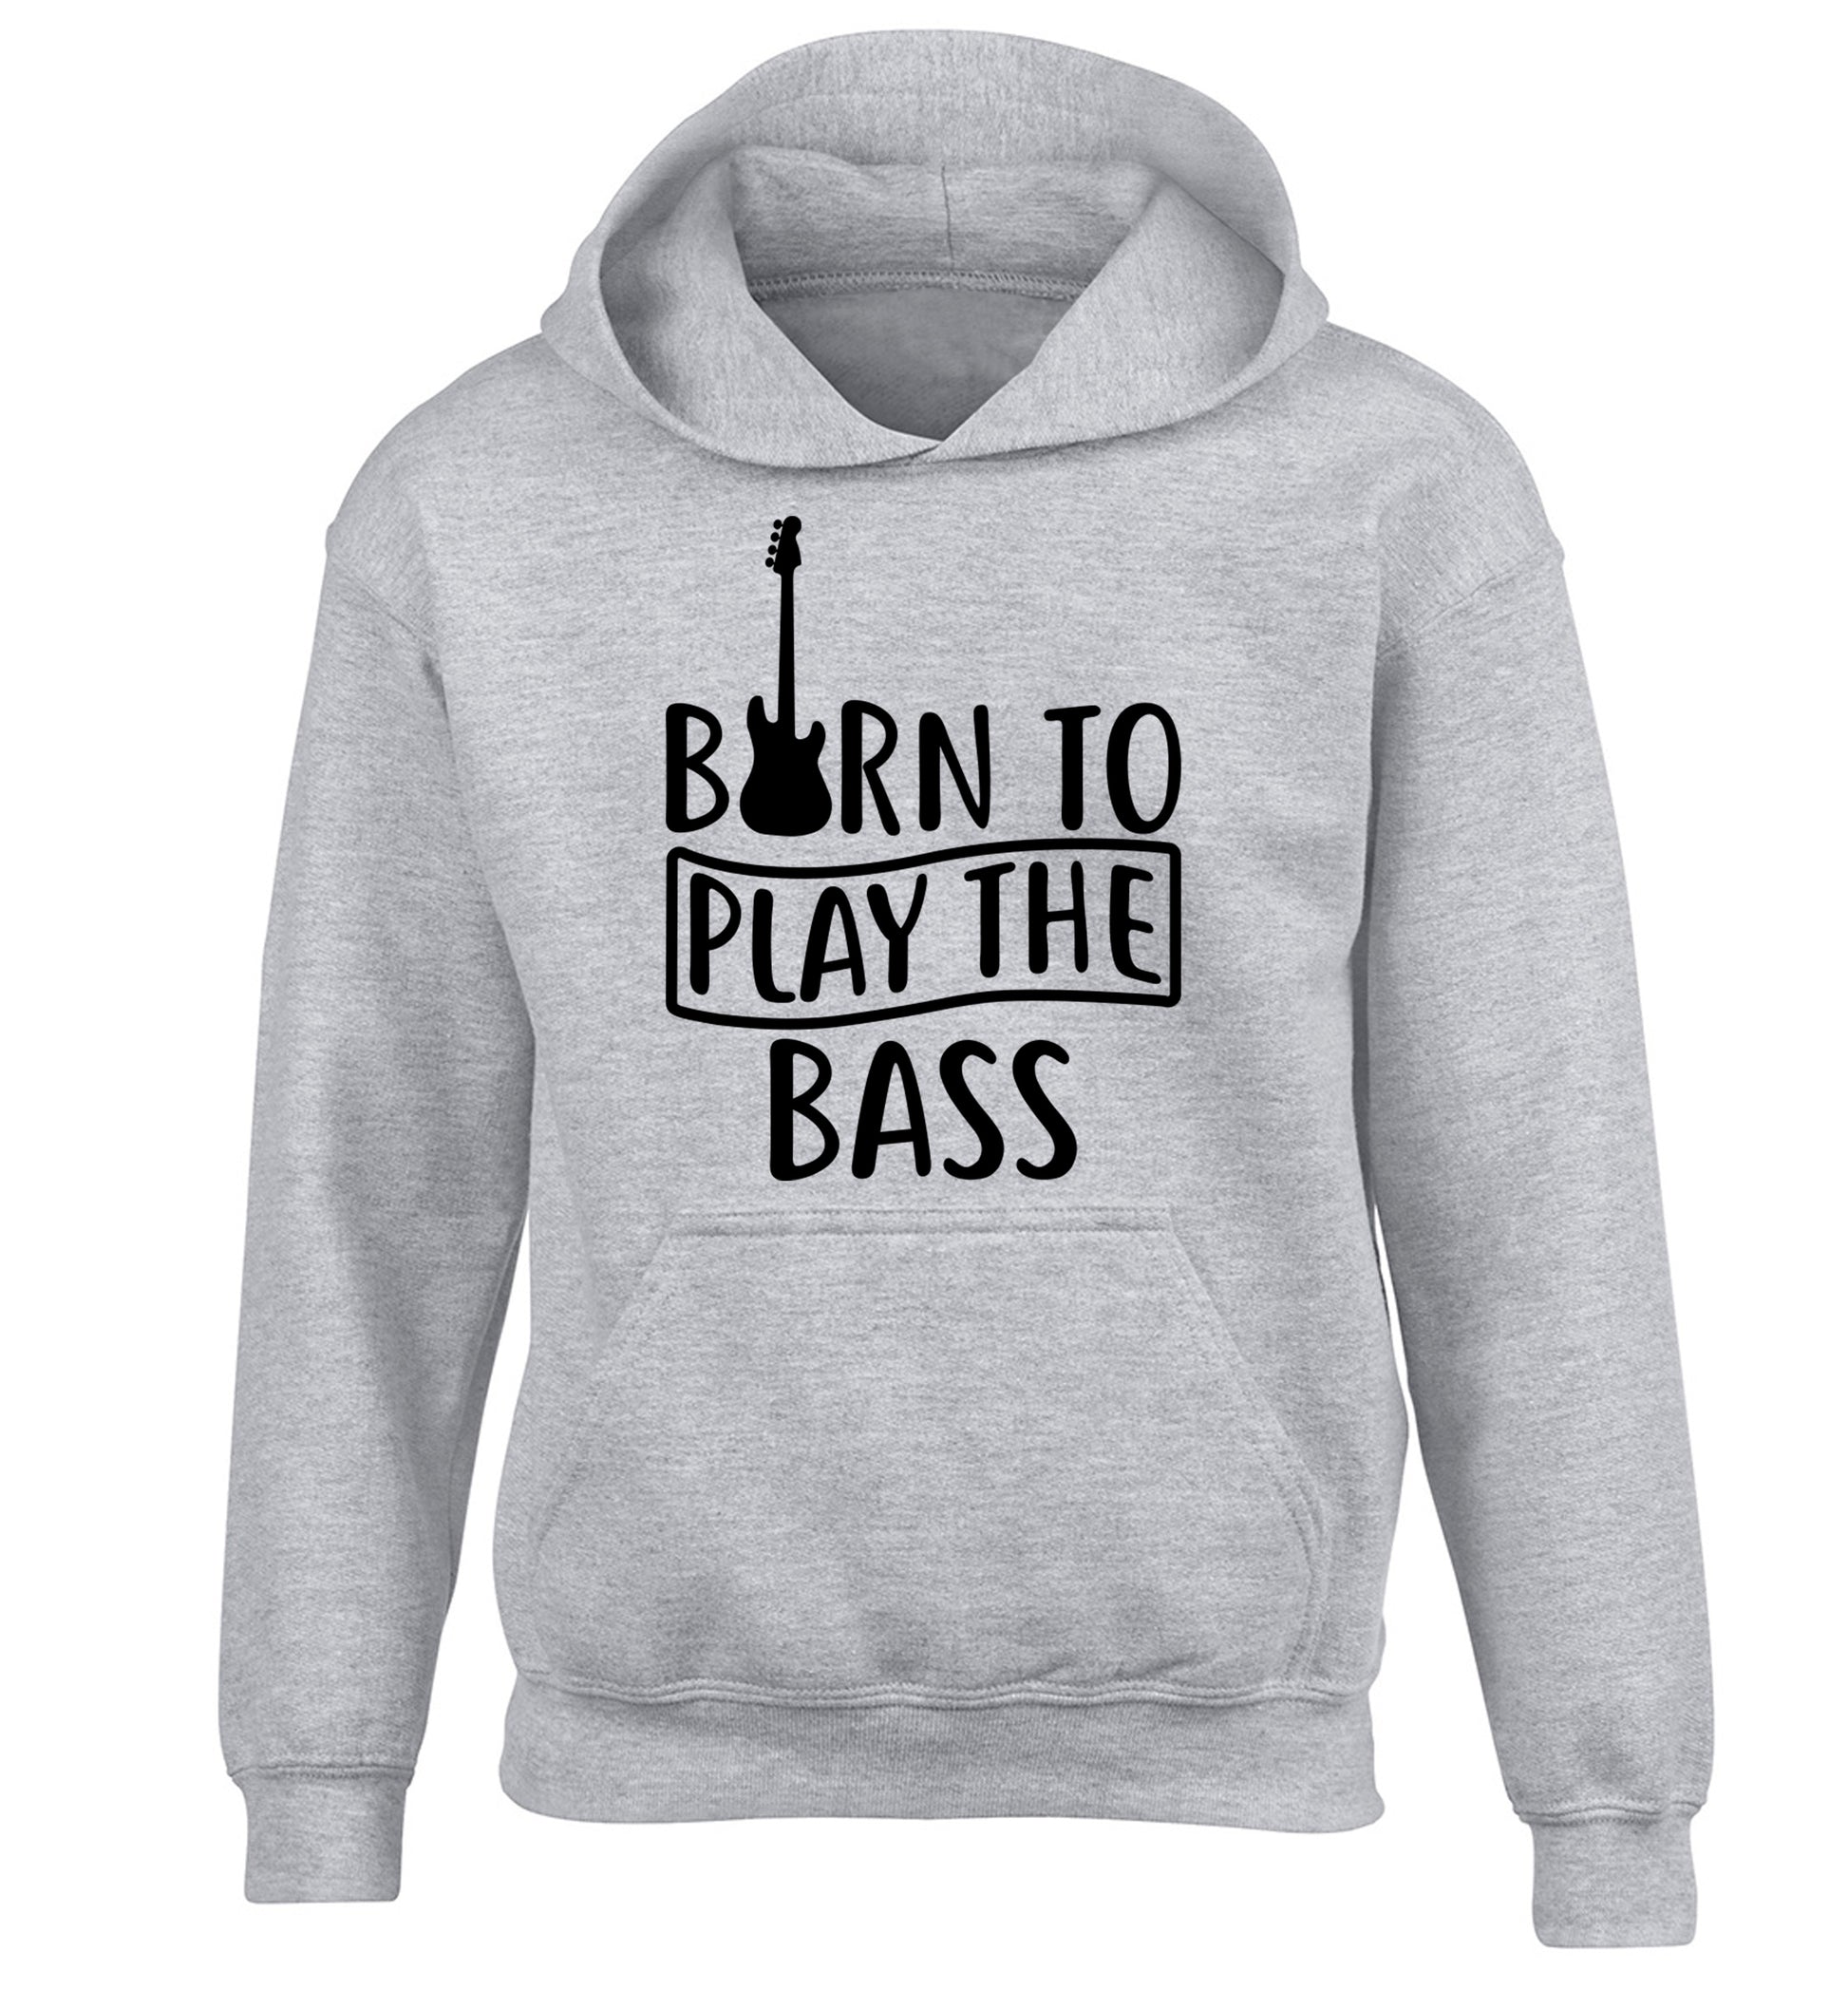 Born to play the bass children's grey hoodie 12-14 Years